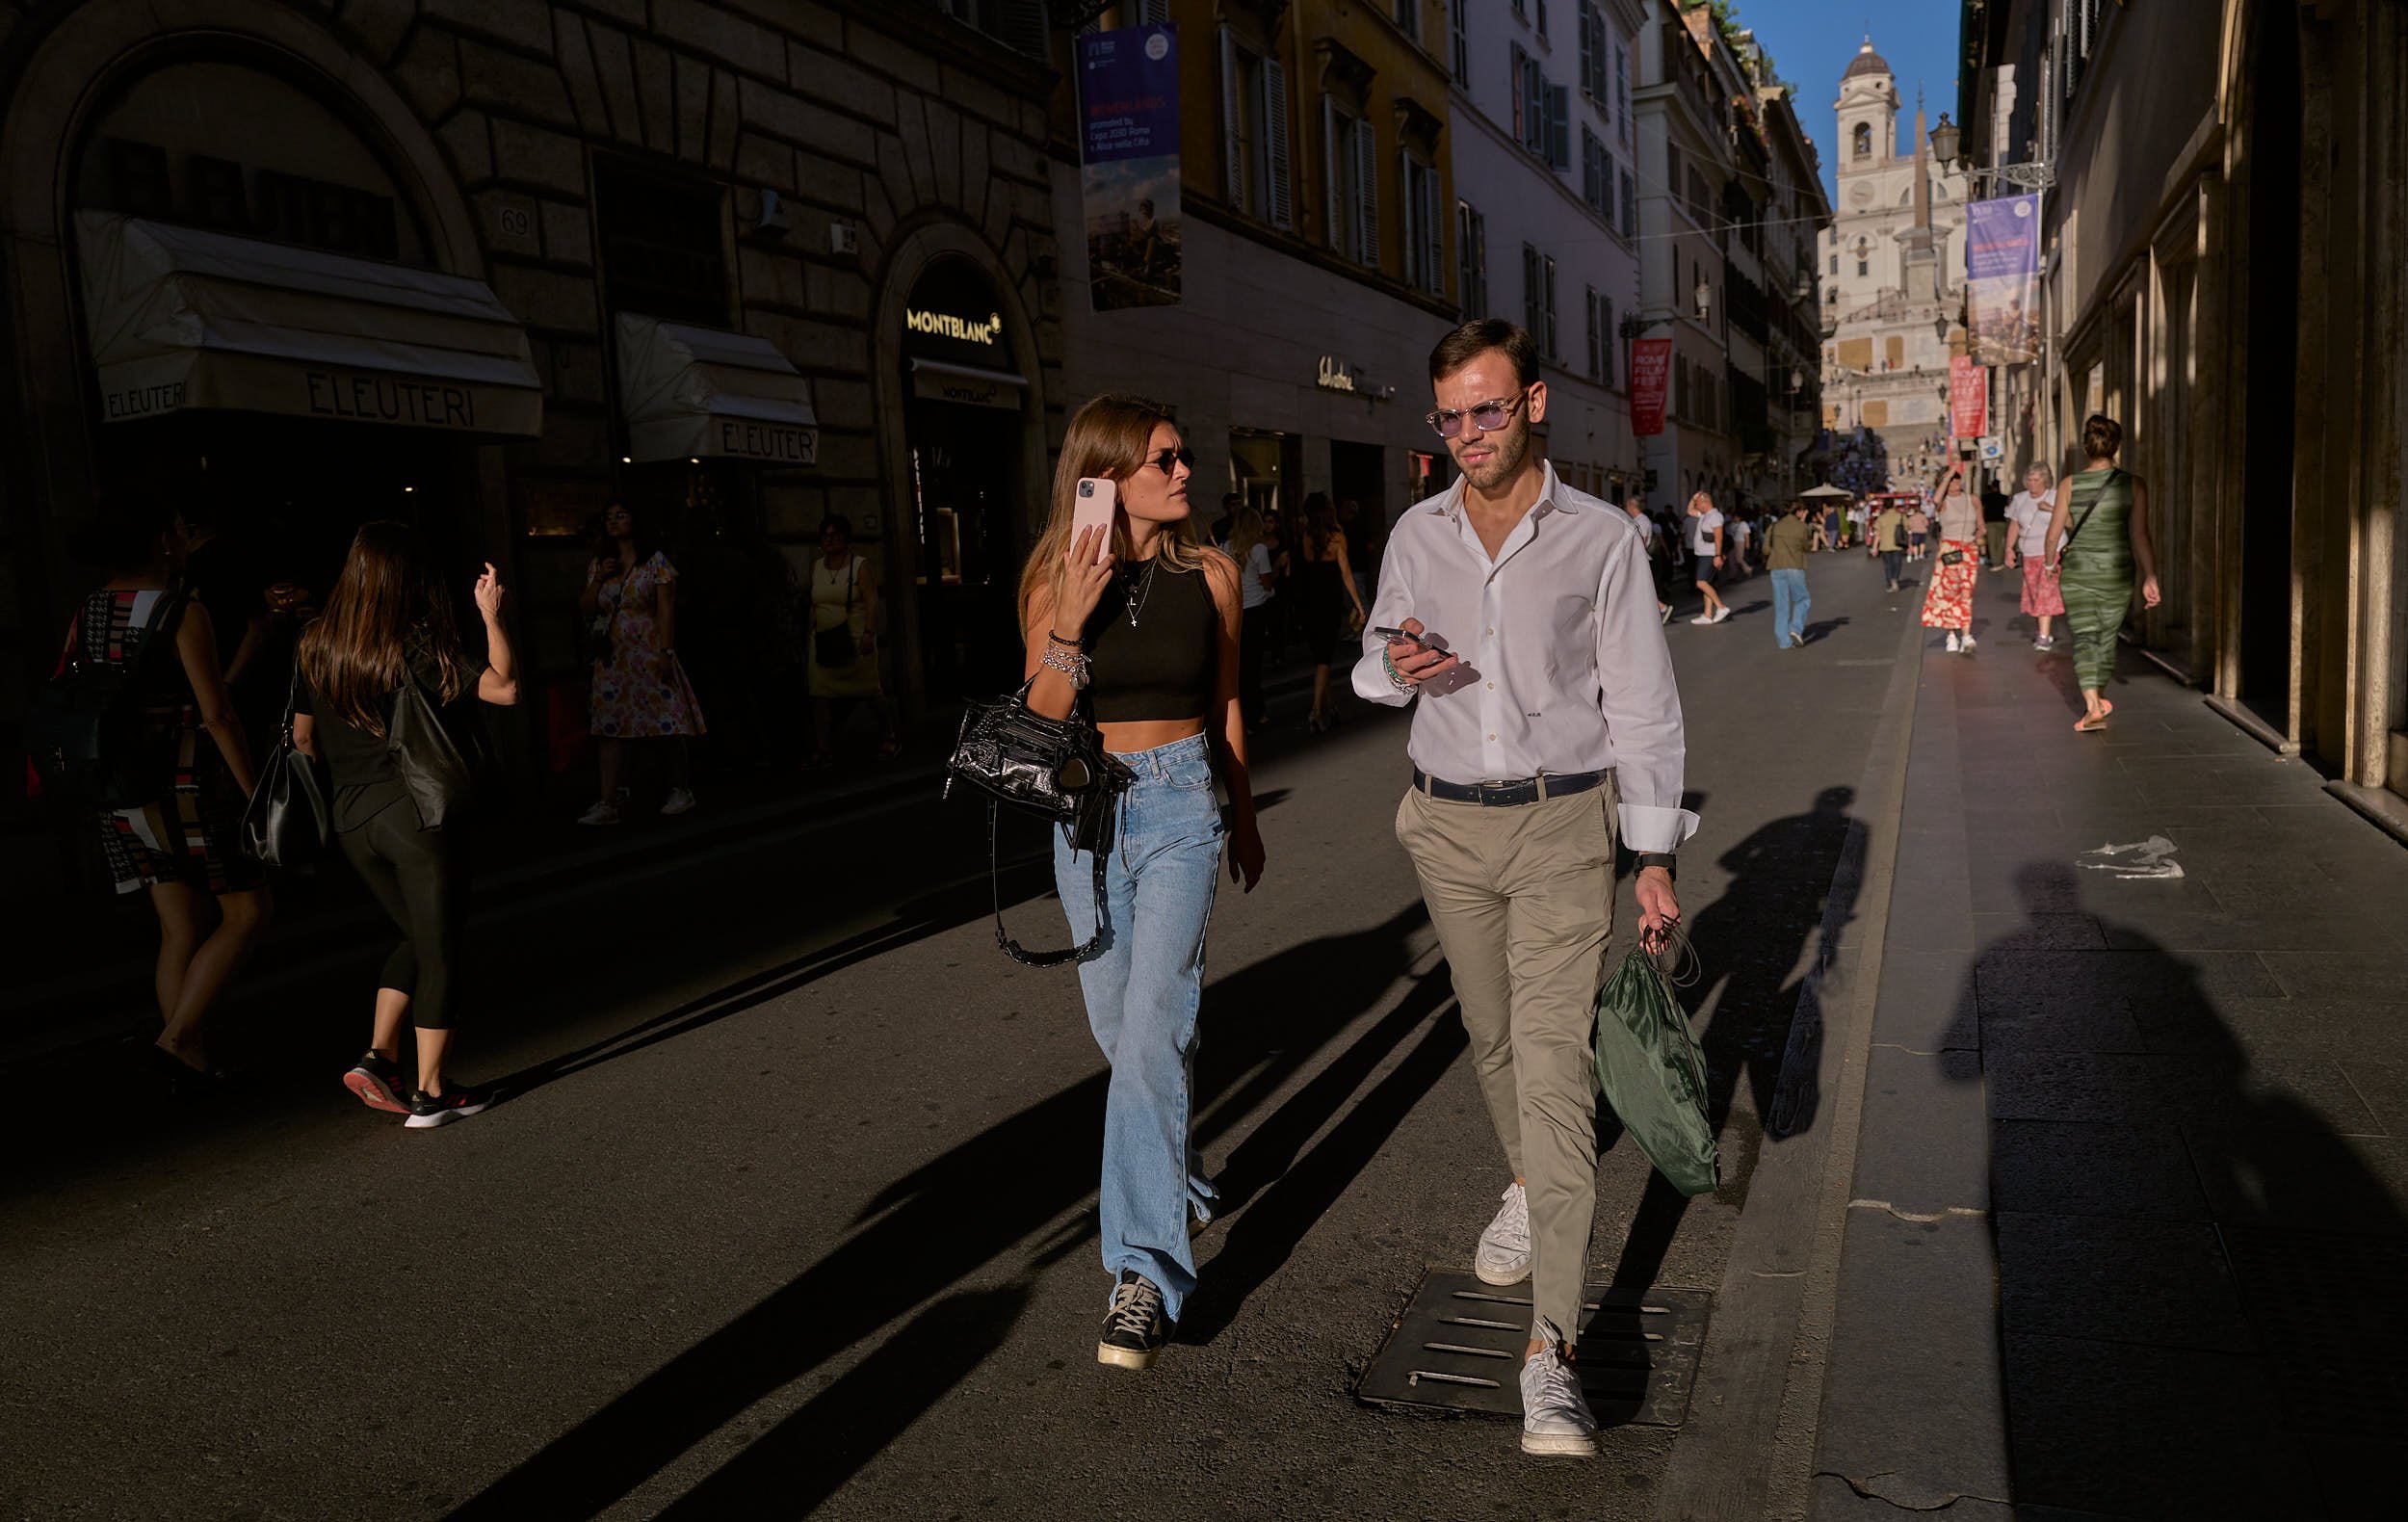 A young couple walking at sunset in via dei condotti